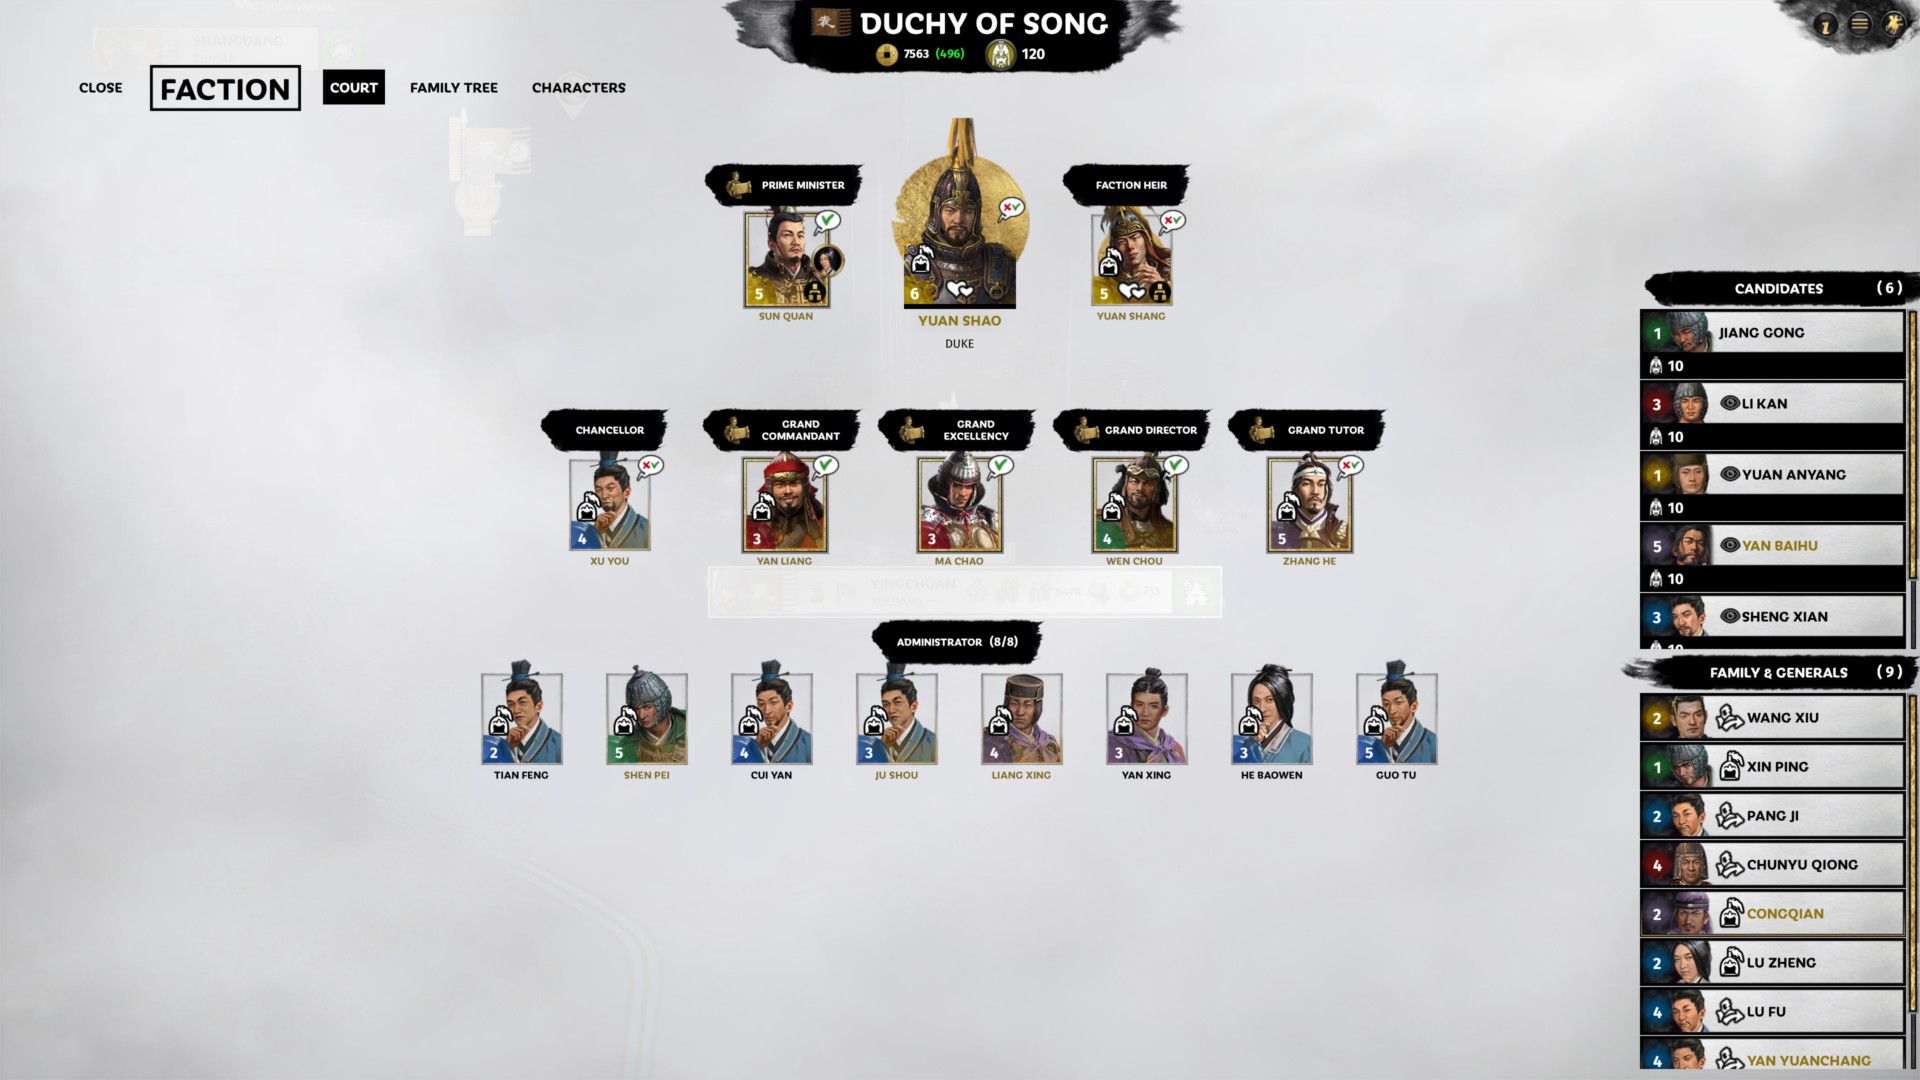 Total War: Three Kingdoms - Fates Divided -- Yuan Shao campaign guide